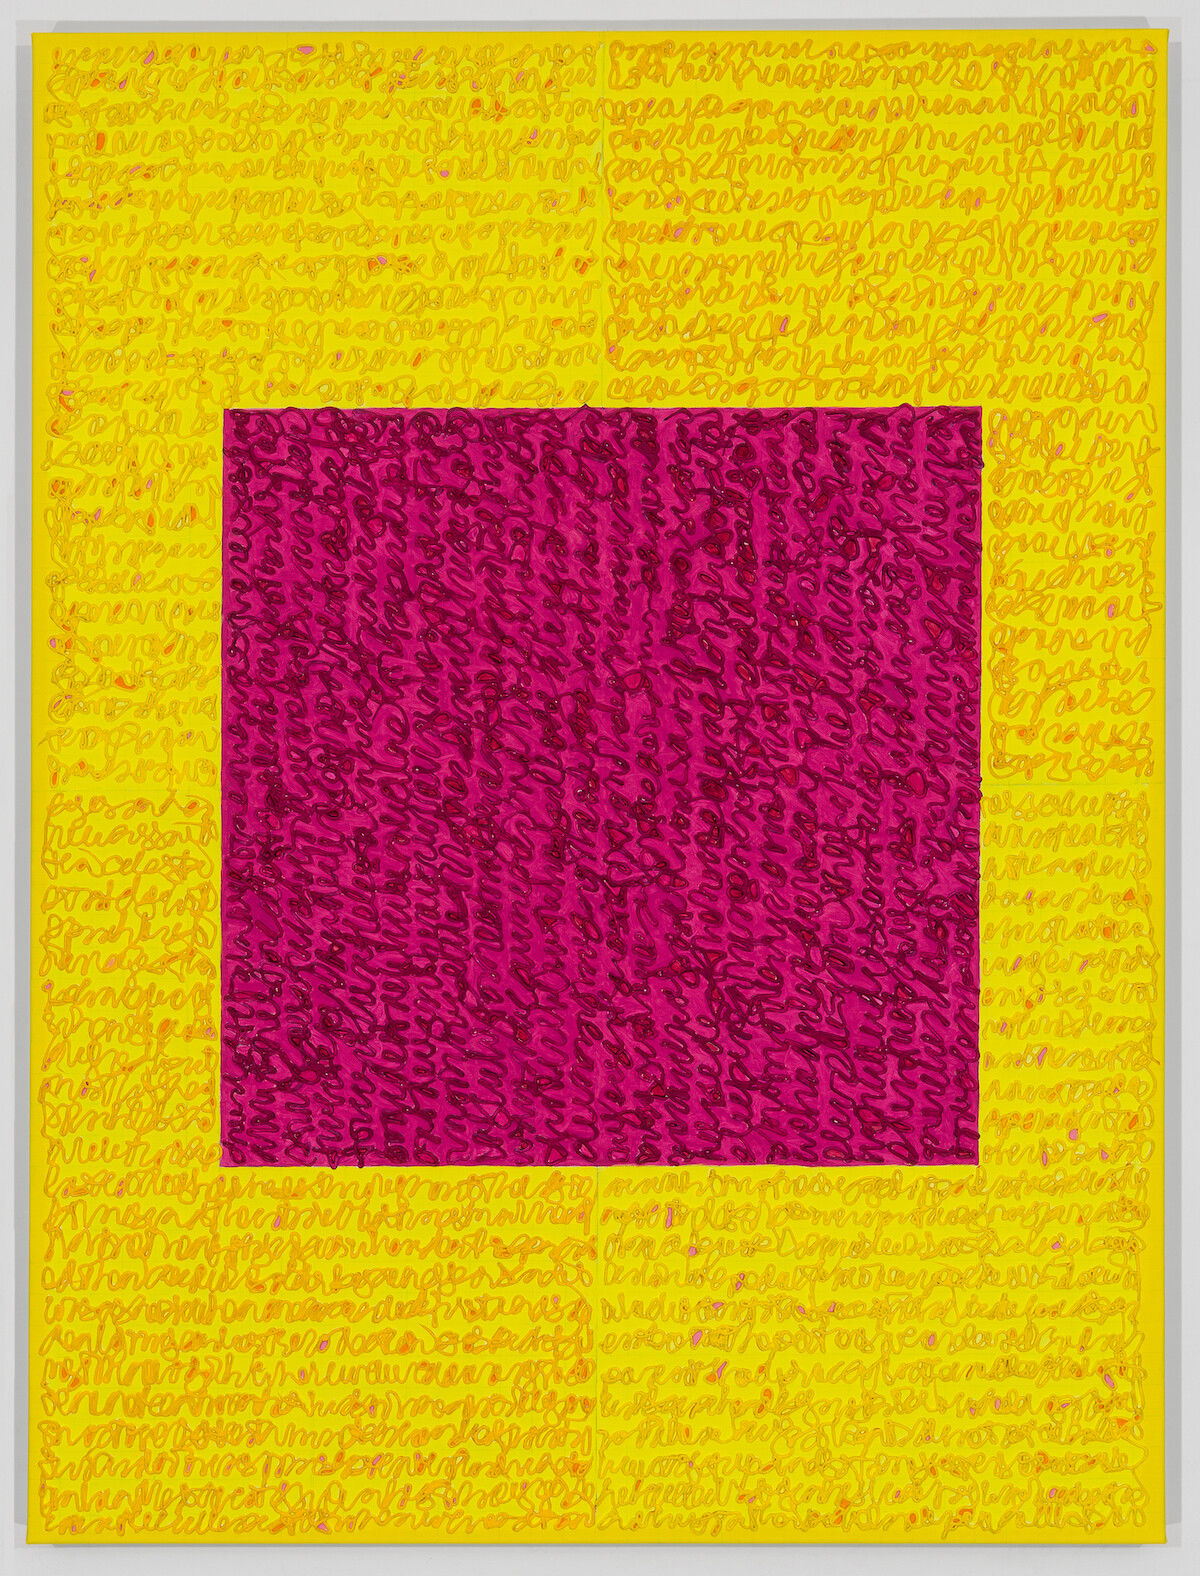 Louise P. Solane, Celeste, 2018, Acrylic paint and pastes on linen, 48 x 36 in., Signed, titled and dated on verso. four rectangles and a central square (yellow and pink) with personal text written in red-orange over the squares to create three dimensional texture. Louise P. Sloane has been creating abstract paintings since 1974. Her works focus on geometric forms while celebrating color and texture.